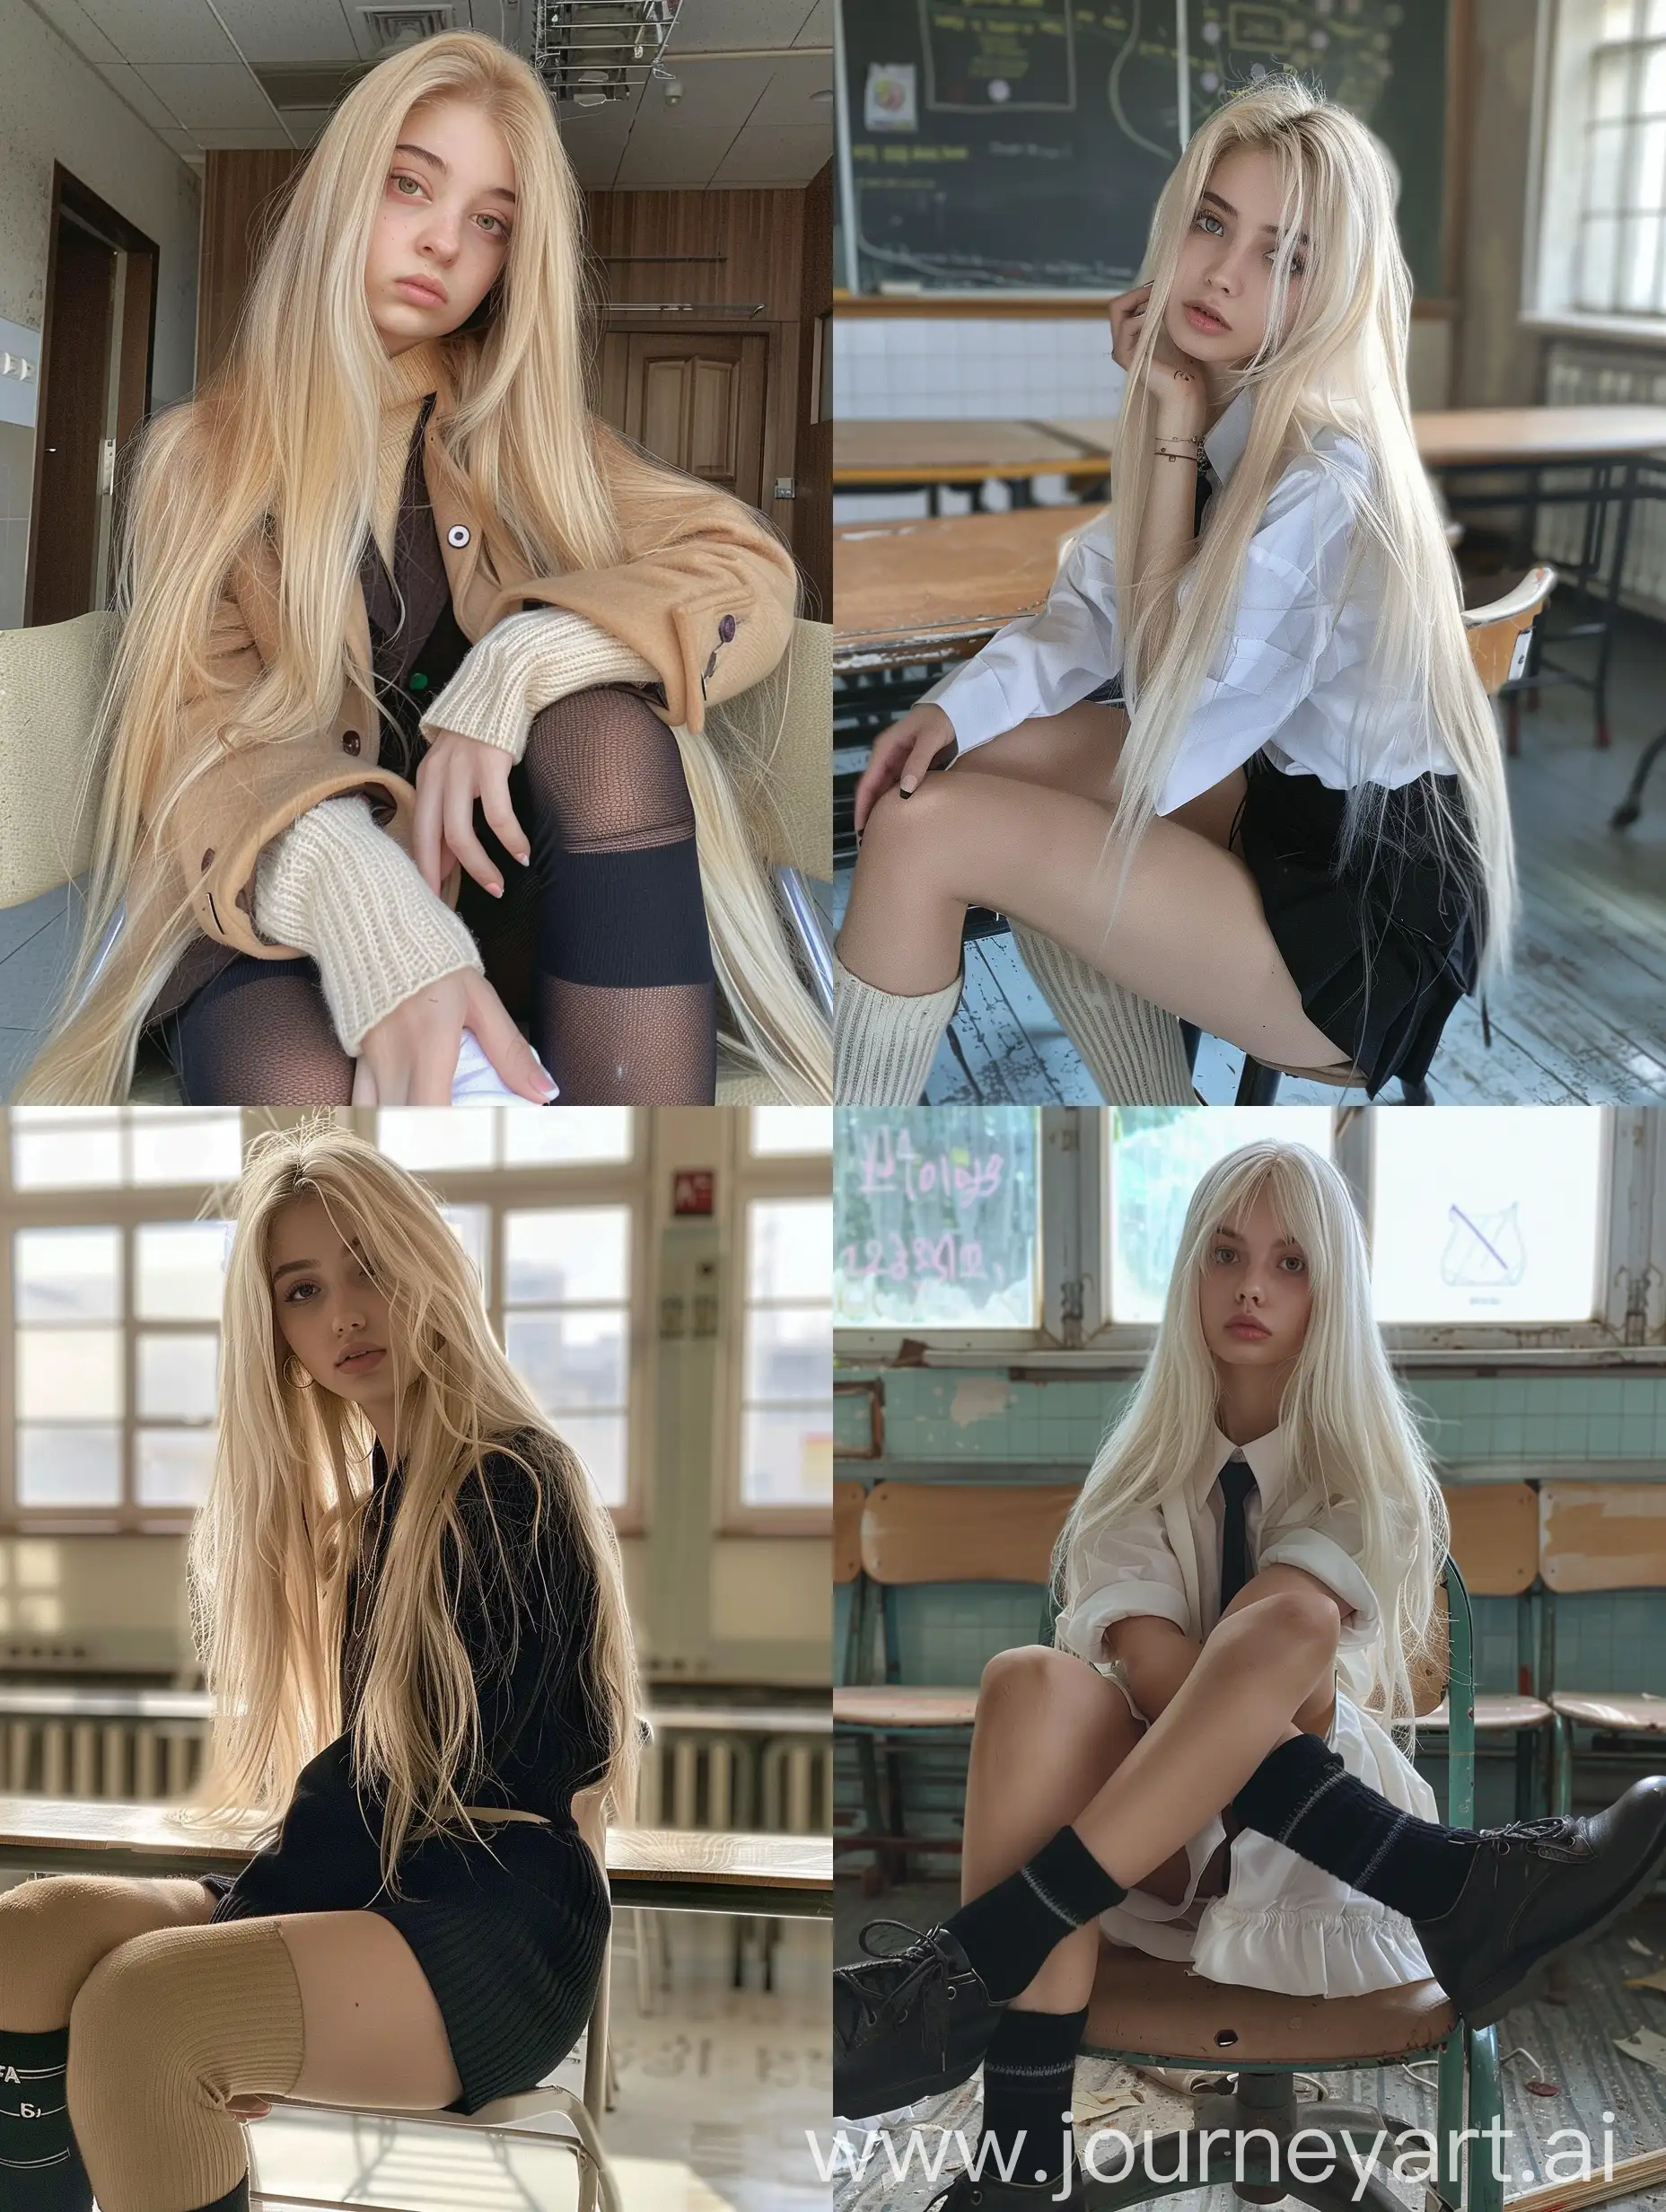 1 Ukrainian girl, long blond hair , 22 years old, influencer, beauty , in the school ,school japan  uniform , makeup,, chão view, sitting on chair , socks and boots, no effect, selfie , iphone selfie, no filters , iphone photo natural